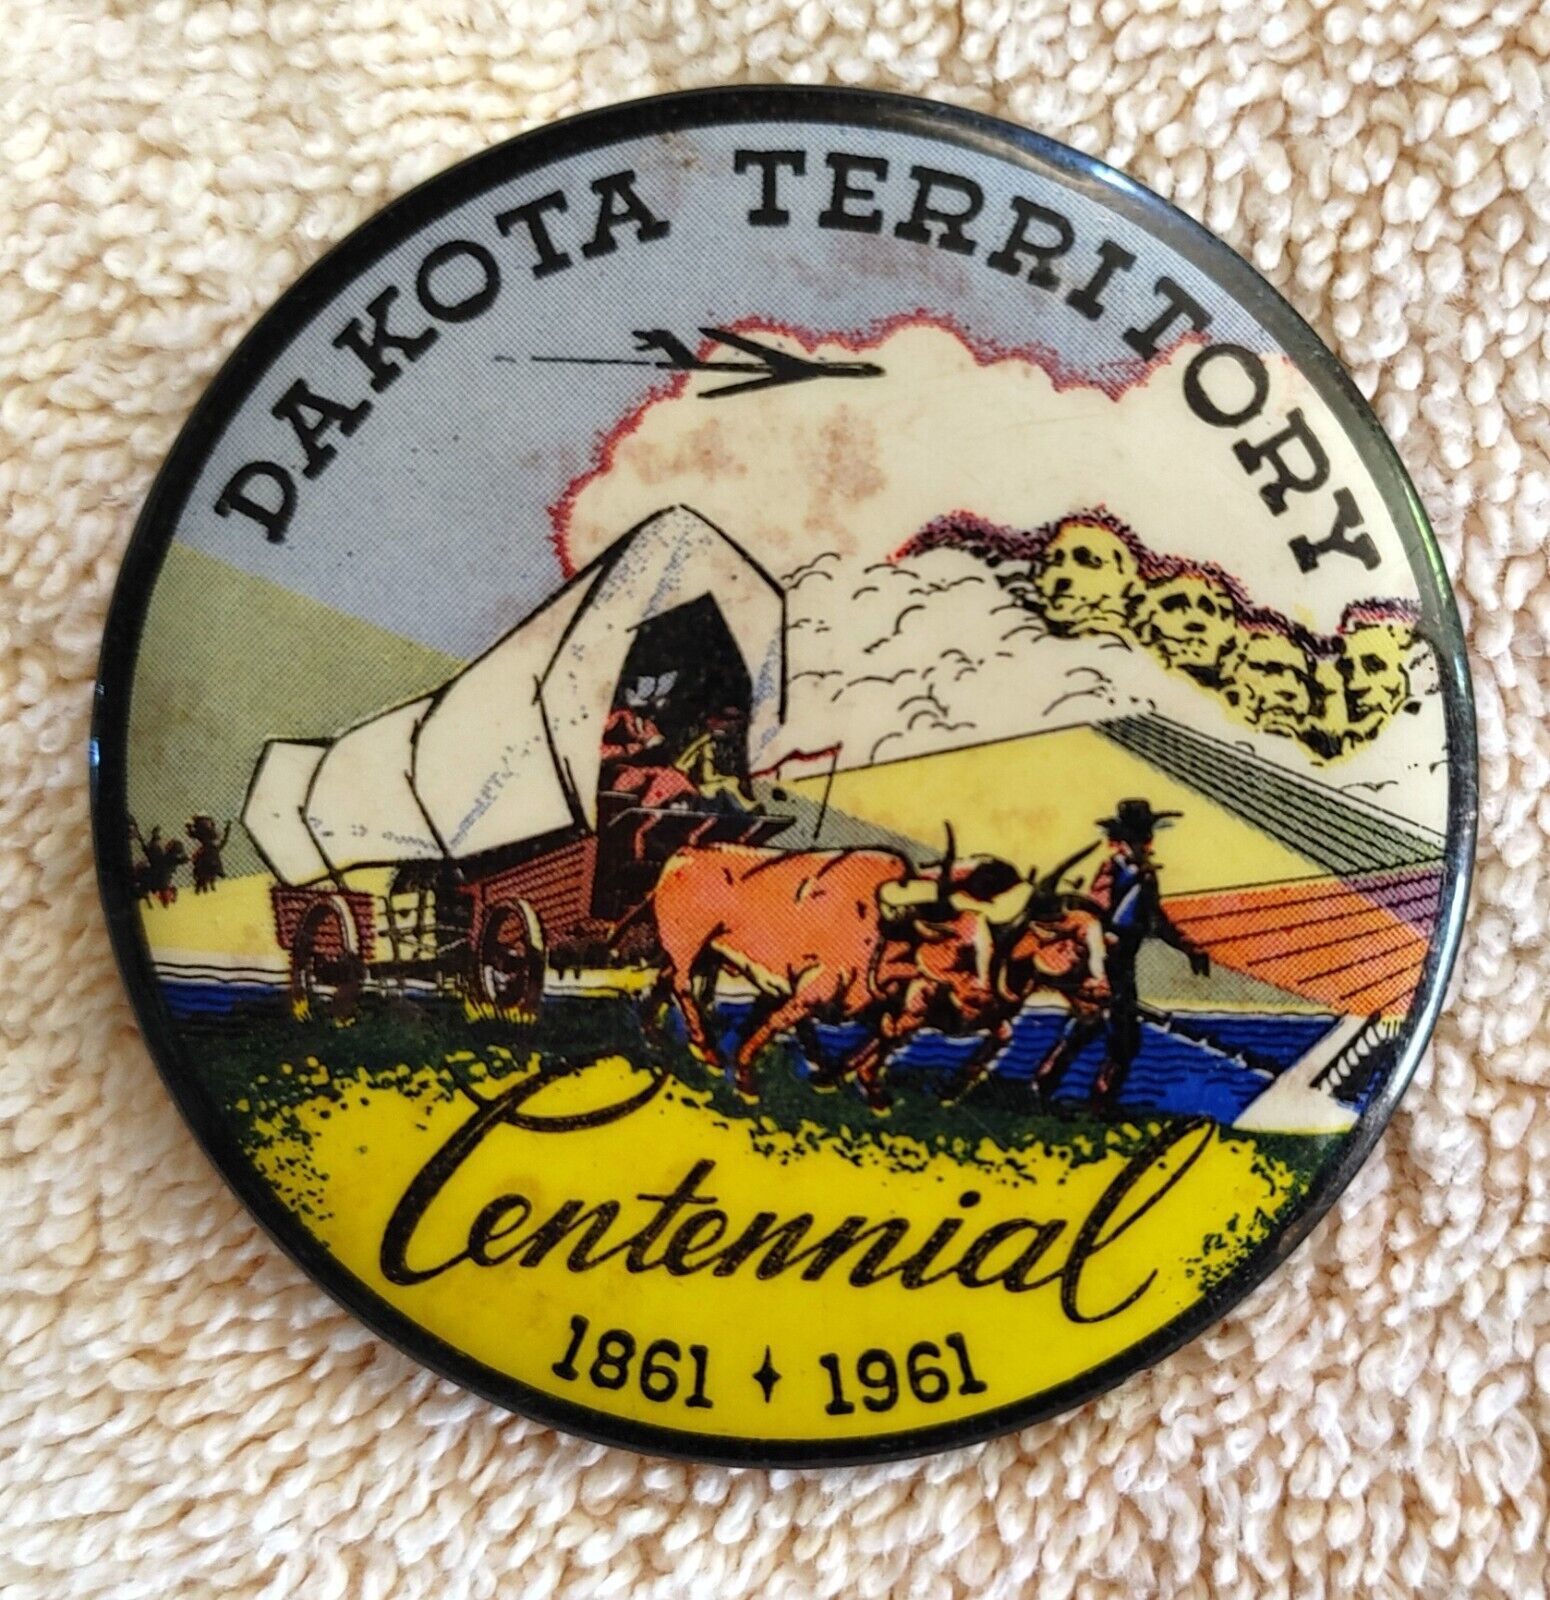 Primary image for Vtg 1961 Dakota Centennial 100 Pin Pinback Covered Wagon Territory North South